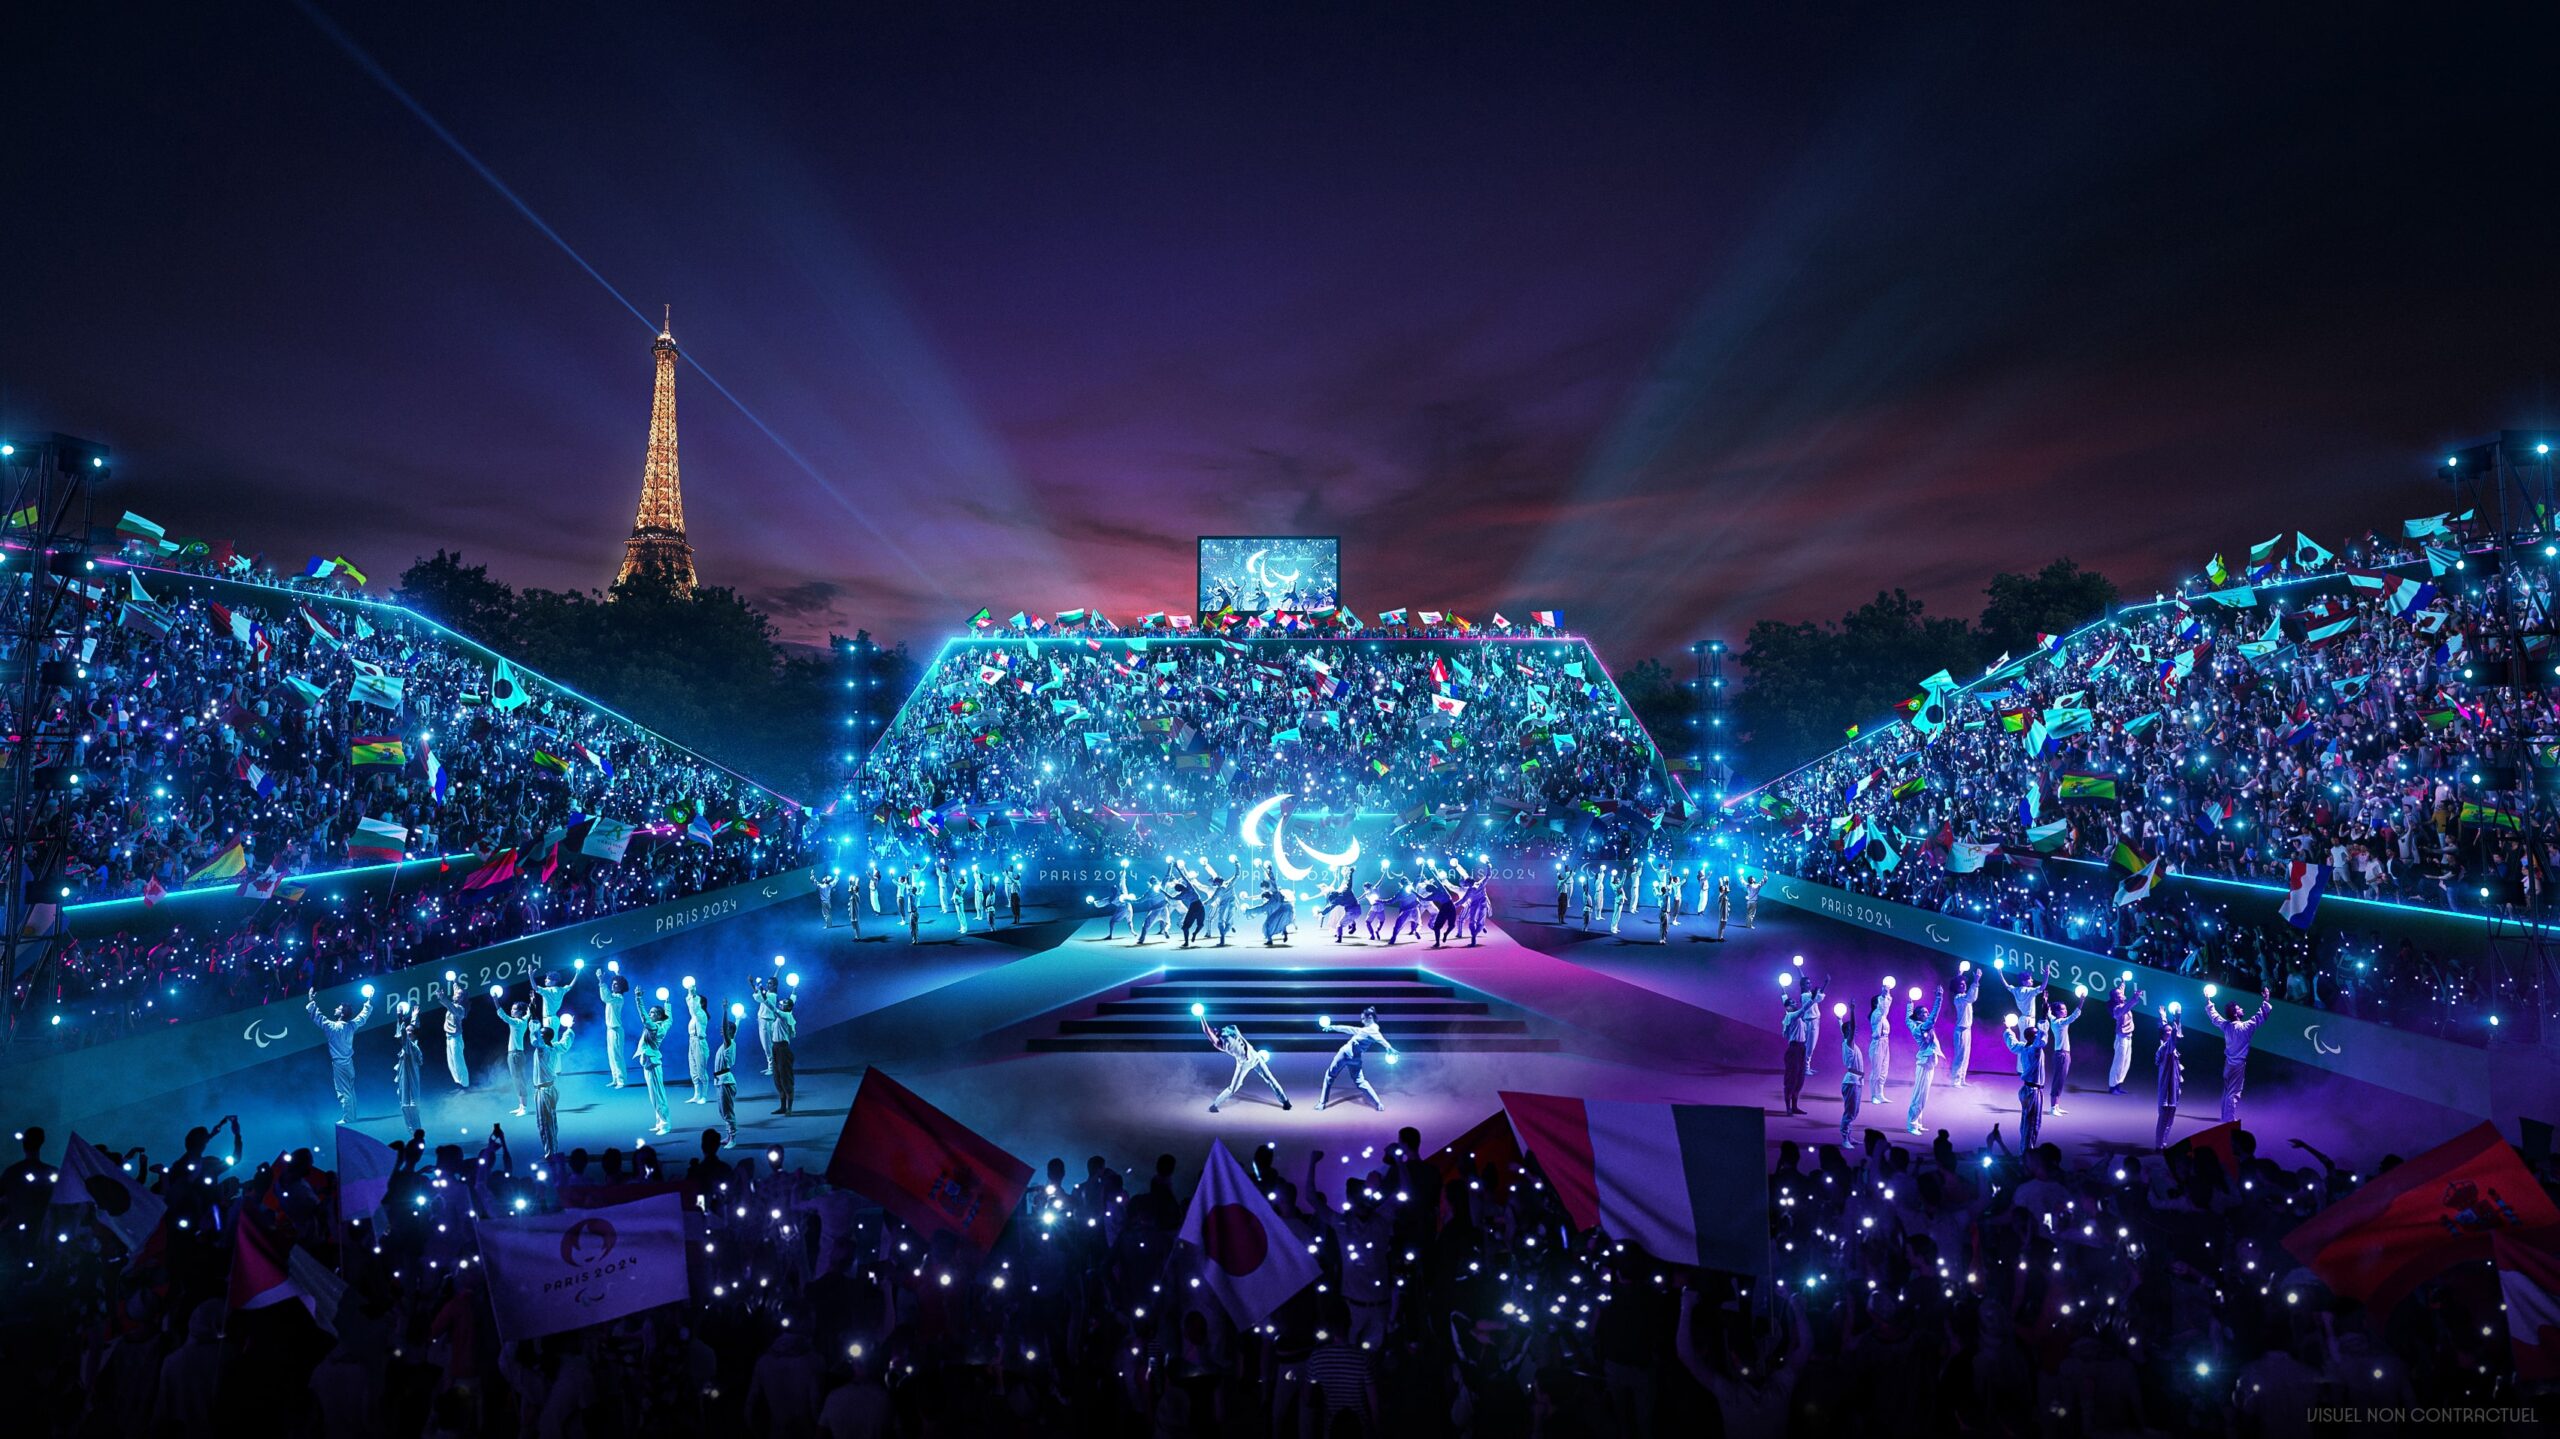 View of the Place de la Concorde at night. A stage with dancers holding lights. The public in the stands are holding flags. The Eiffel Tower can be seen in the background.